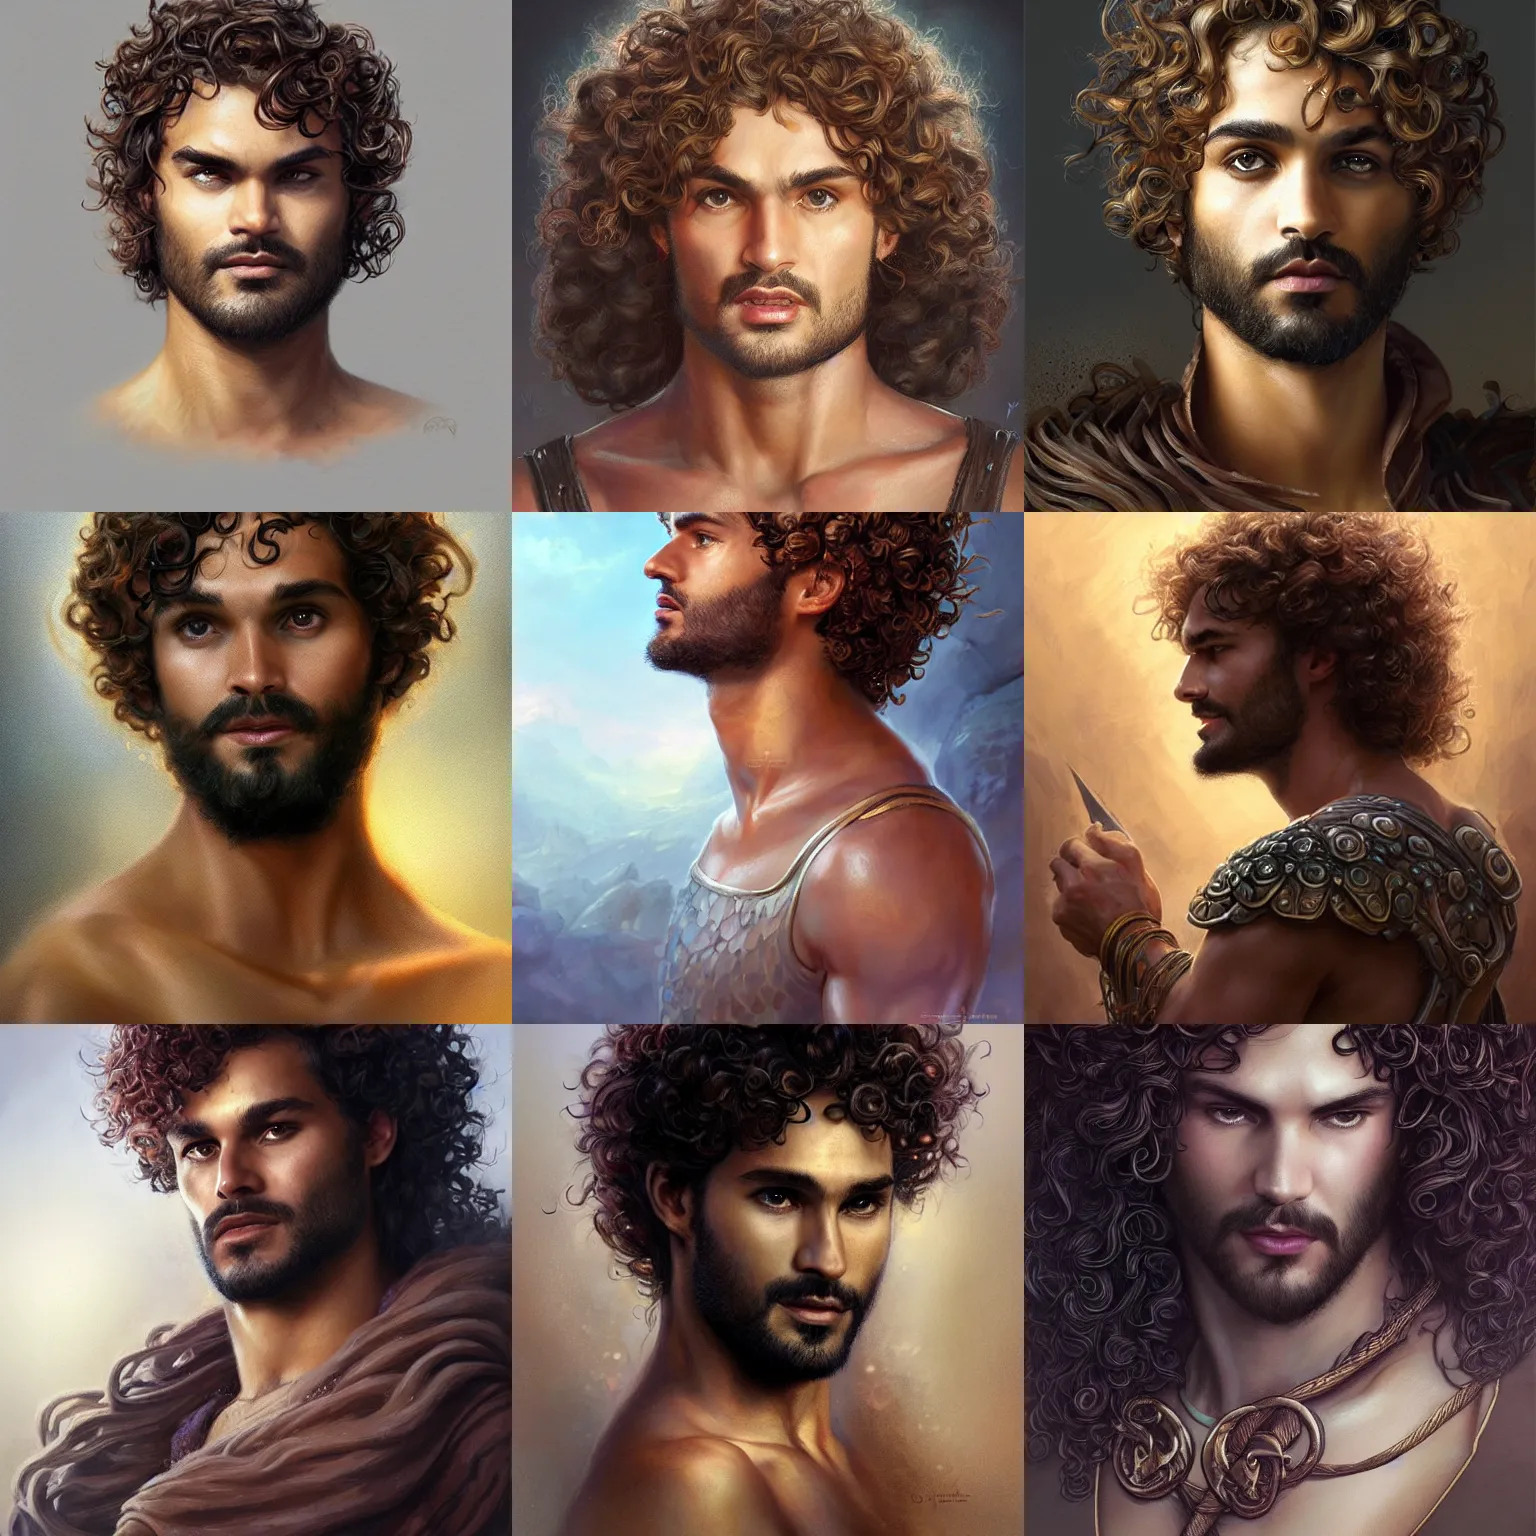 101 of the Best Curly Hairstyles for Men Haircut Ideas